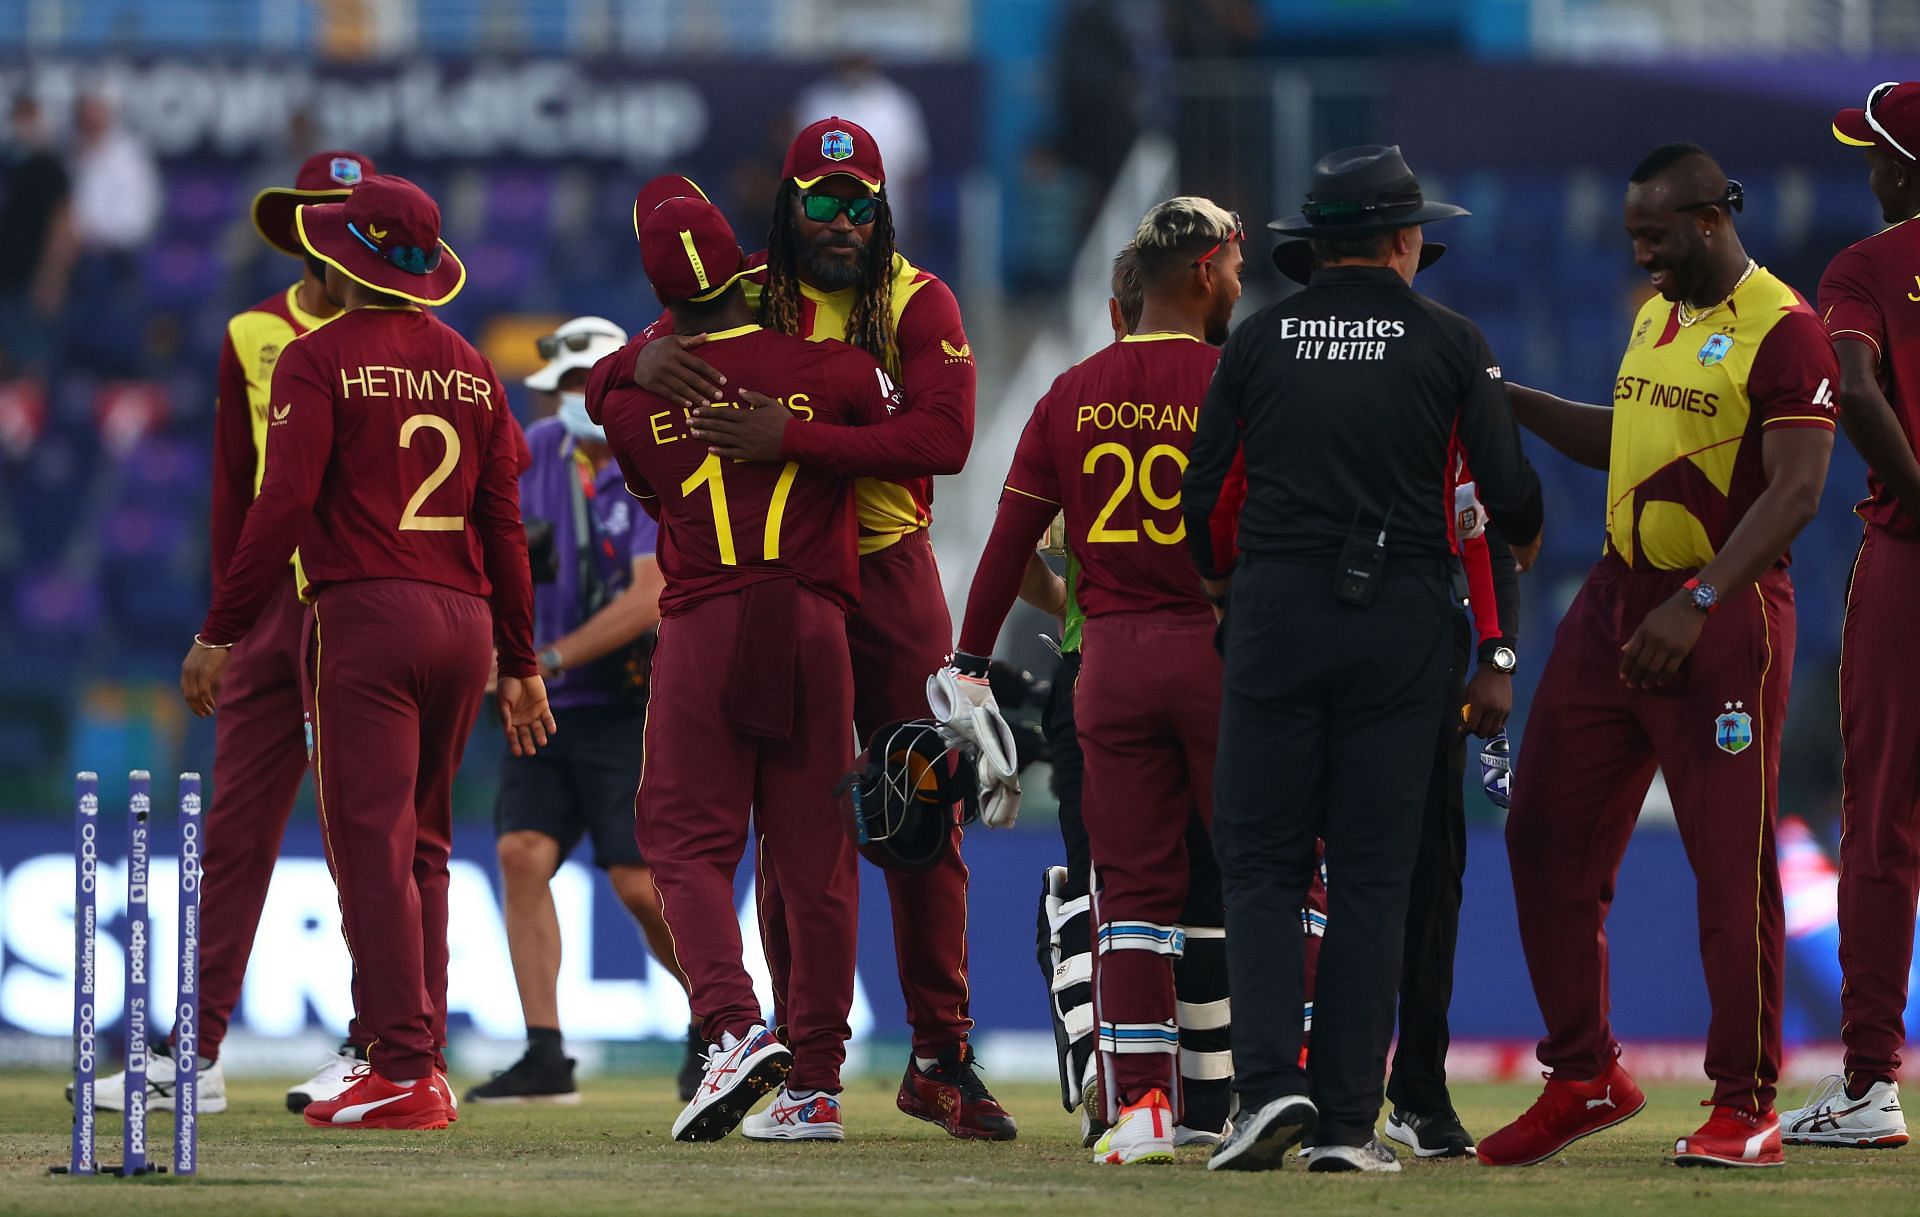 A loss to Australia in their final Super 12 game has meant that the West Indies have missed out on securing direct qualification to the Super 12 stage of the next edition.